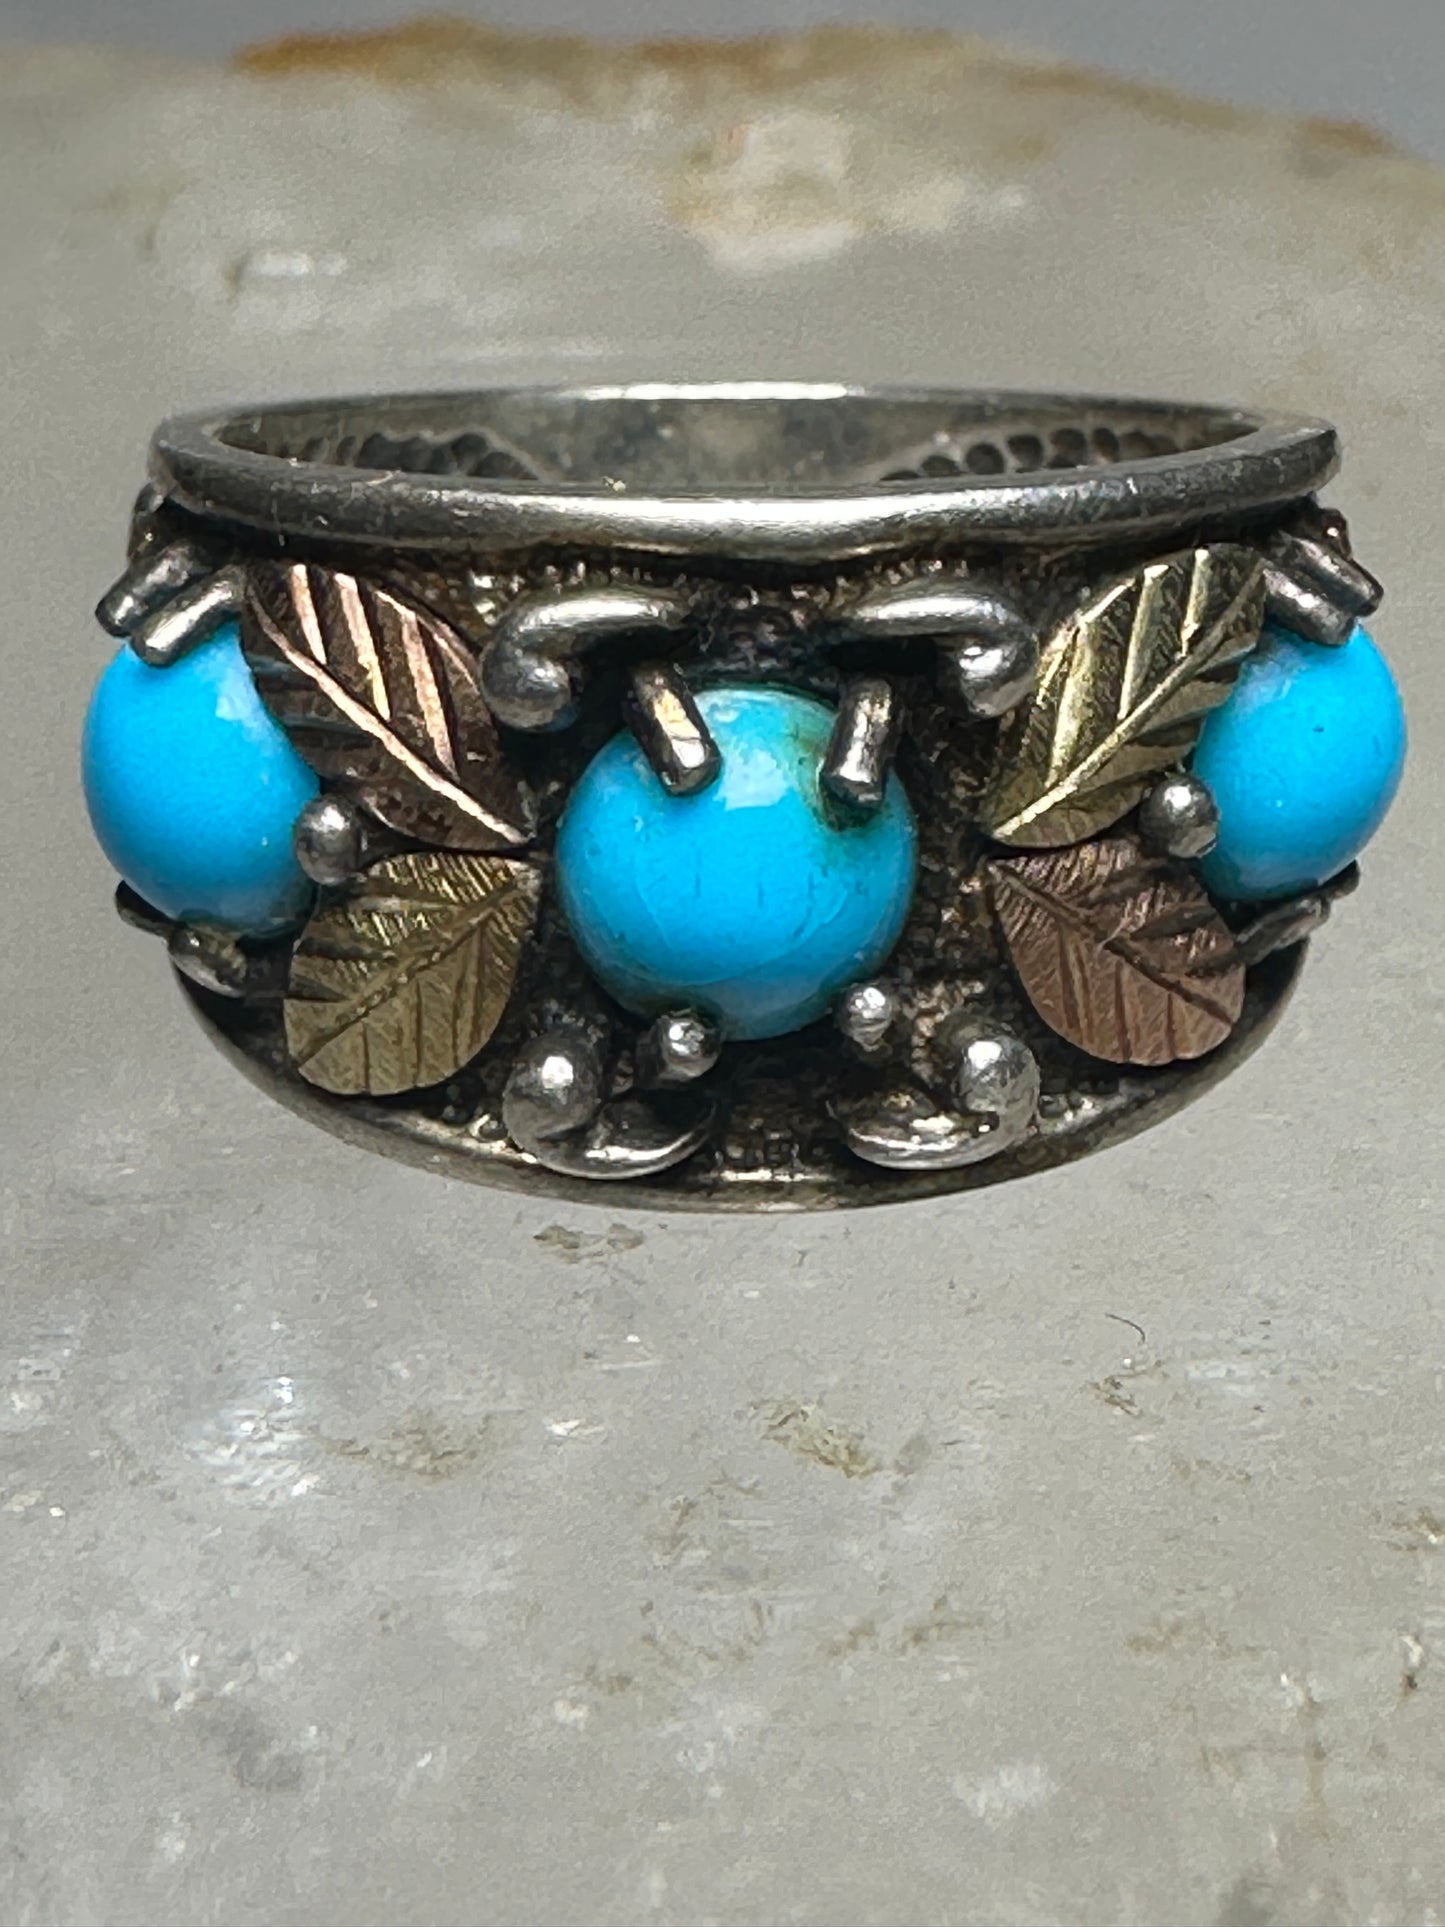 Black Hills Gold ring turquoise band size  4.75 sterling silver women